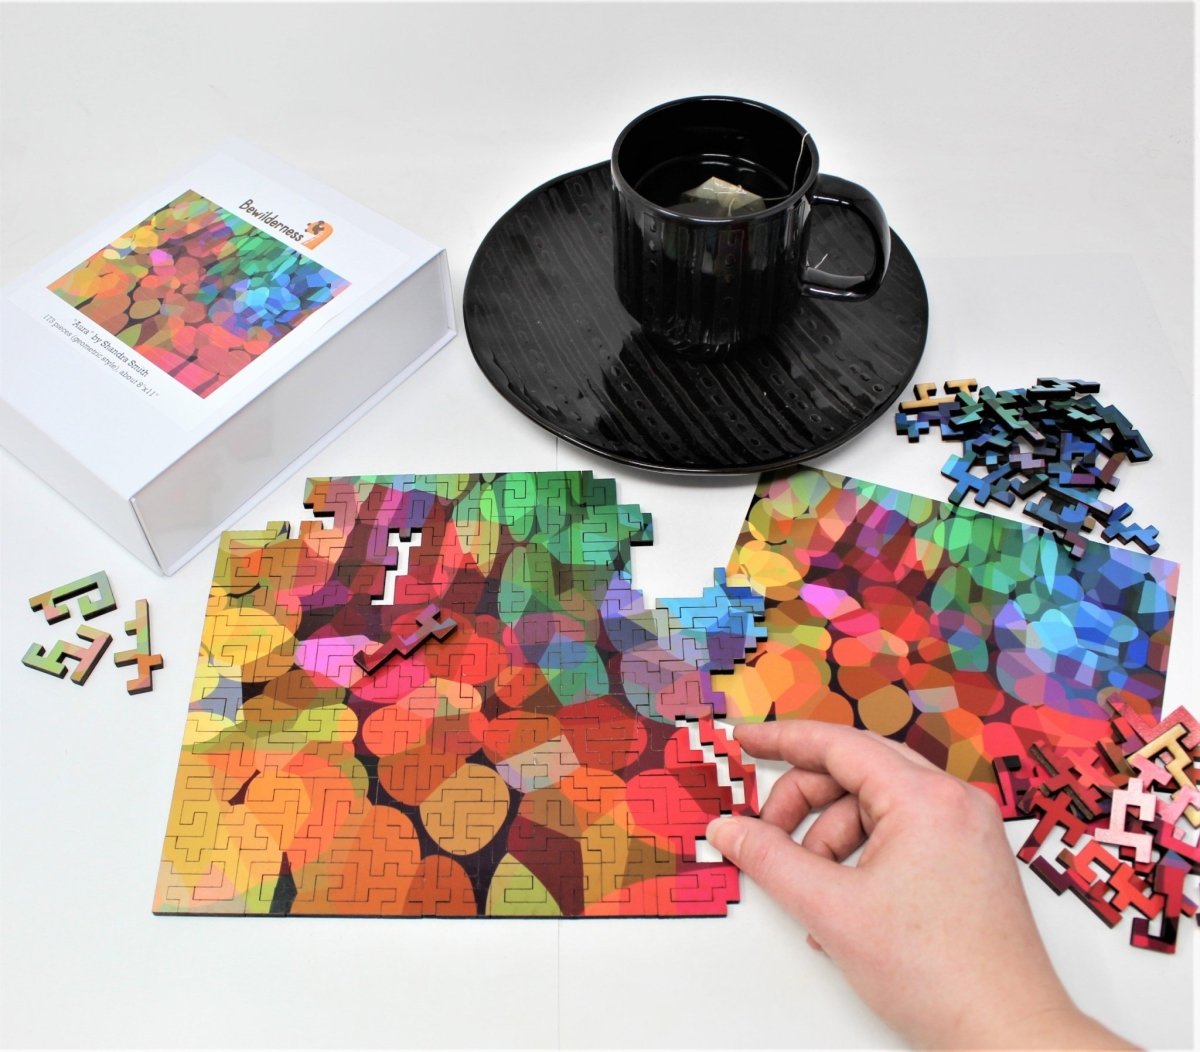 Ahnna putting together our Aura colorful geometric puzzle